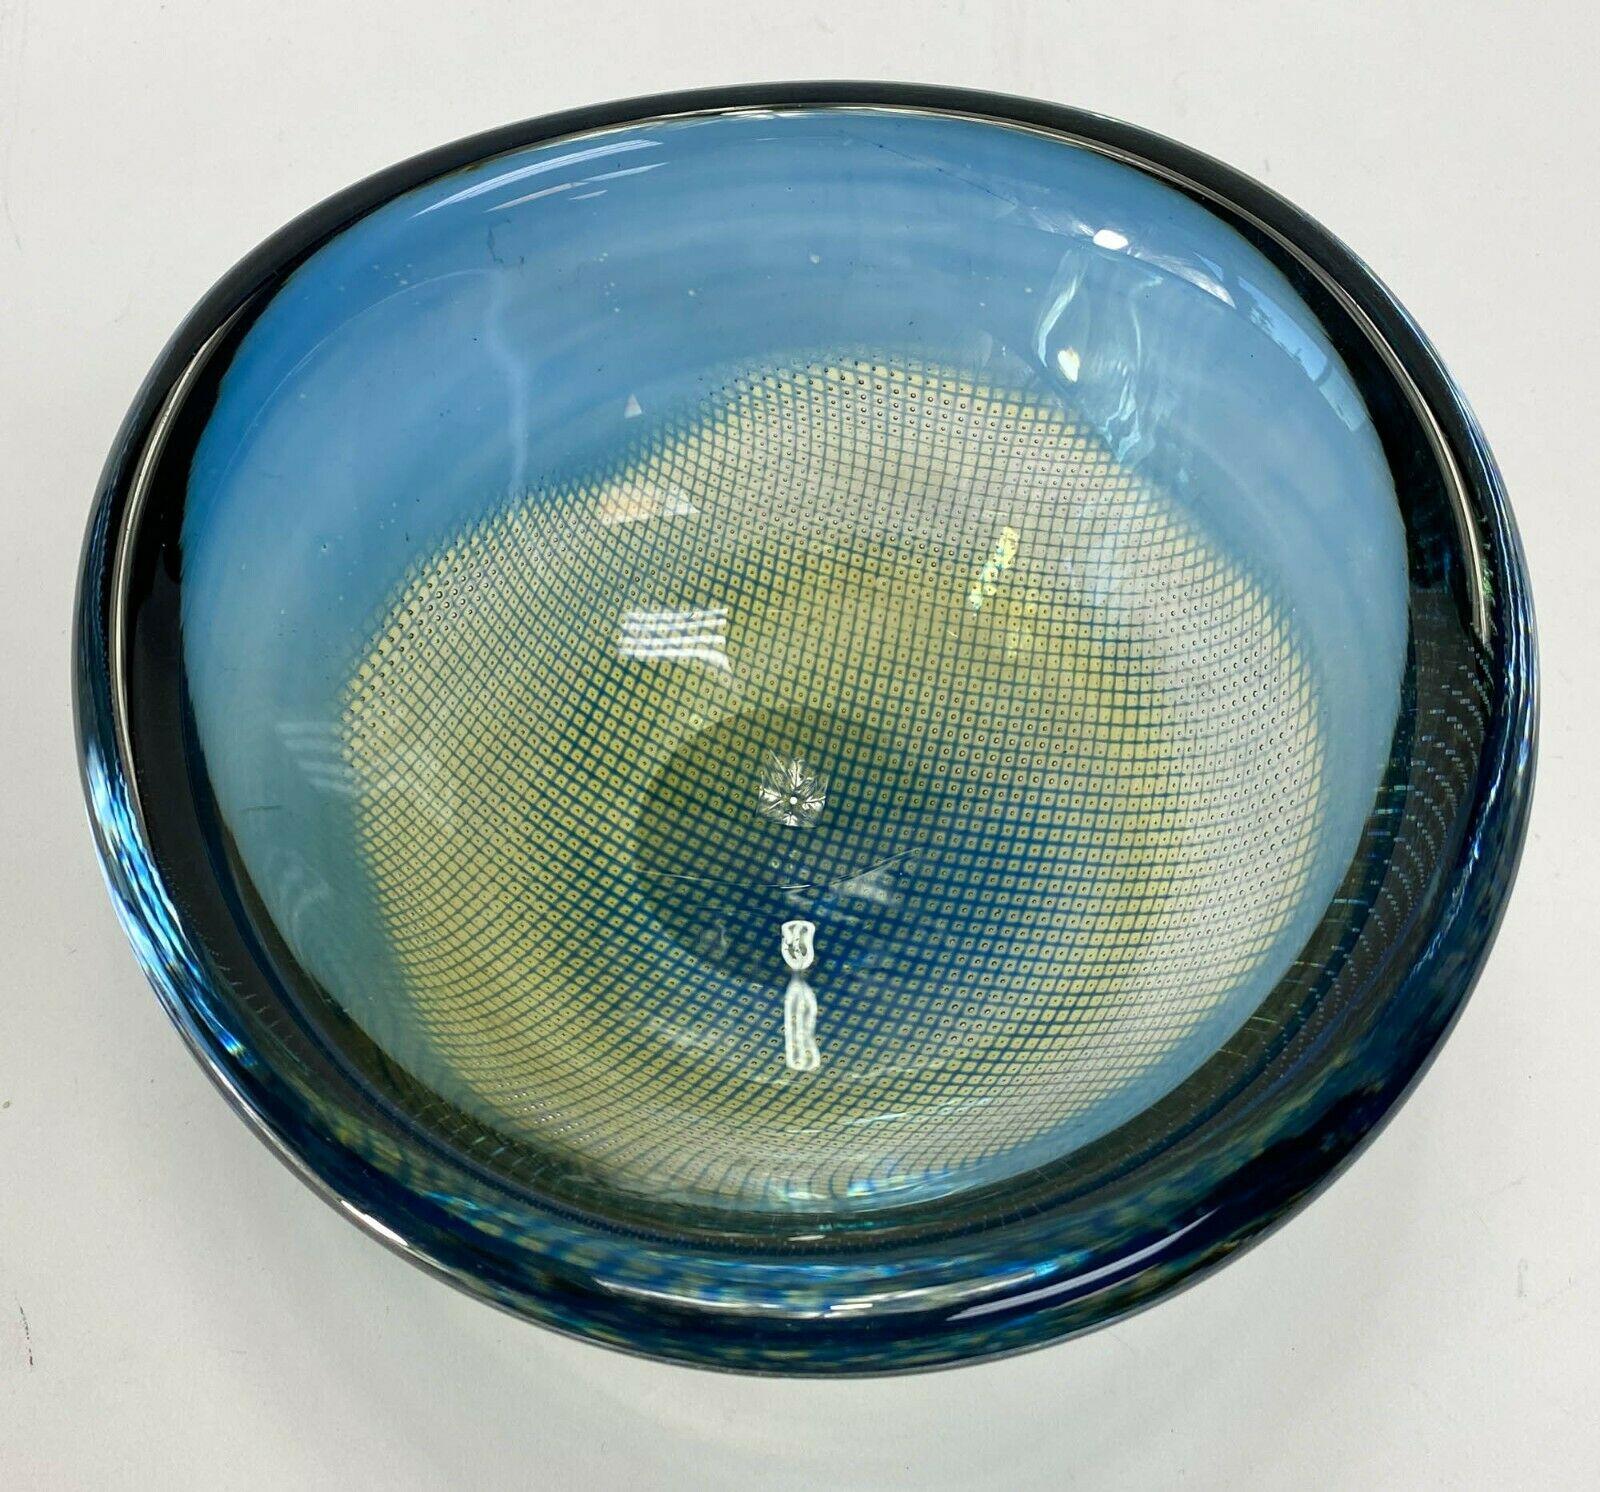 Orrefors Art Glass Kraka bowl No.342 Sven Palmquist, circa 1960.

Additional Information:
Brand: Orrefors 
Type: Bowl
Features: Signed
Dimension: 7.5 in. diameter x 4 in. height
Condition: Great condition. Minor shelf ware on bottom.